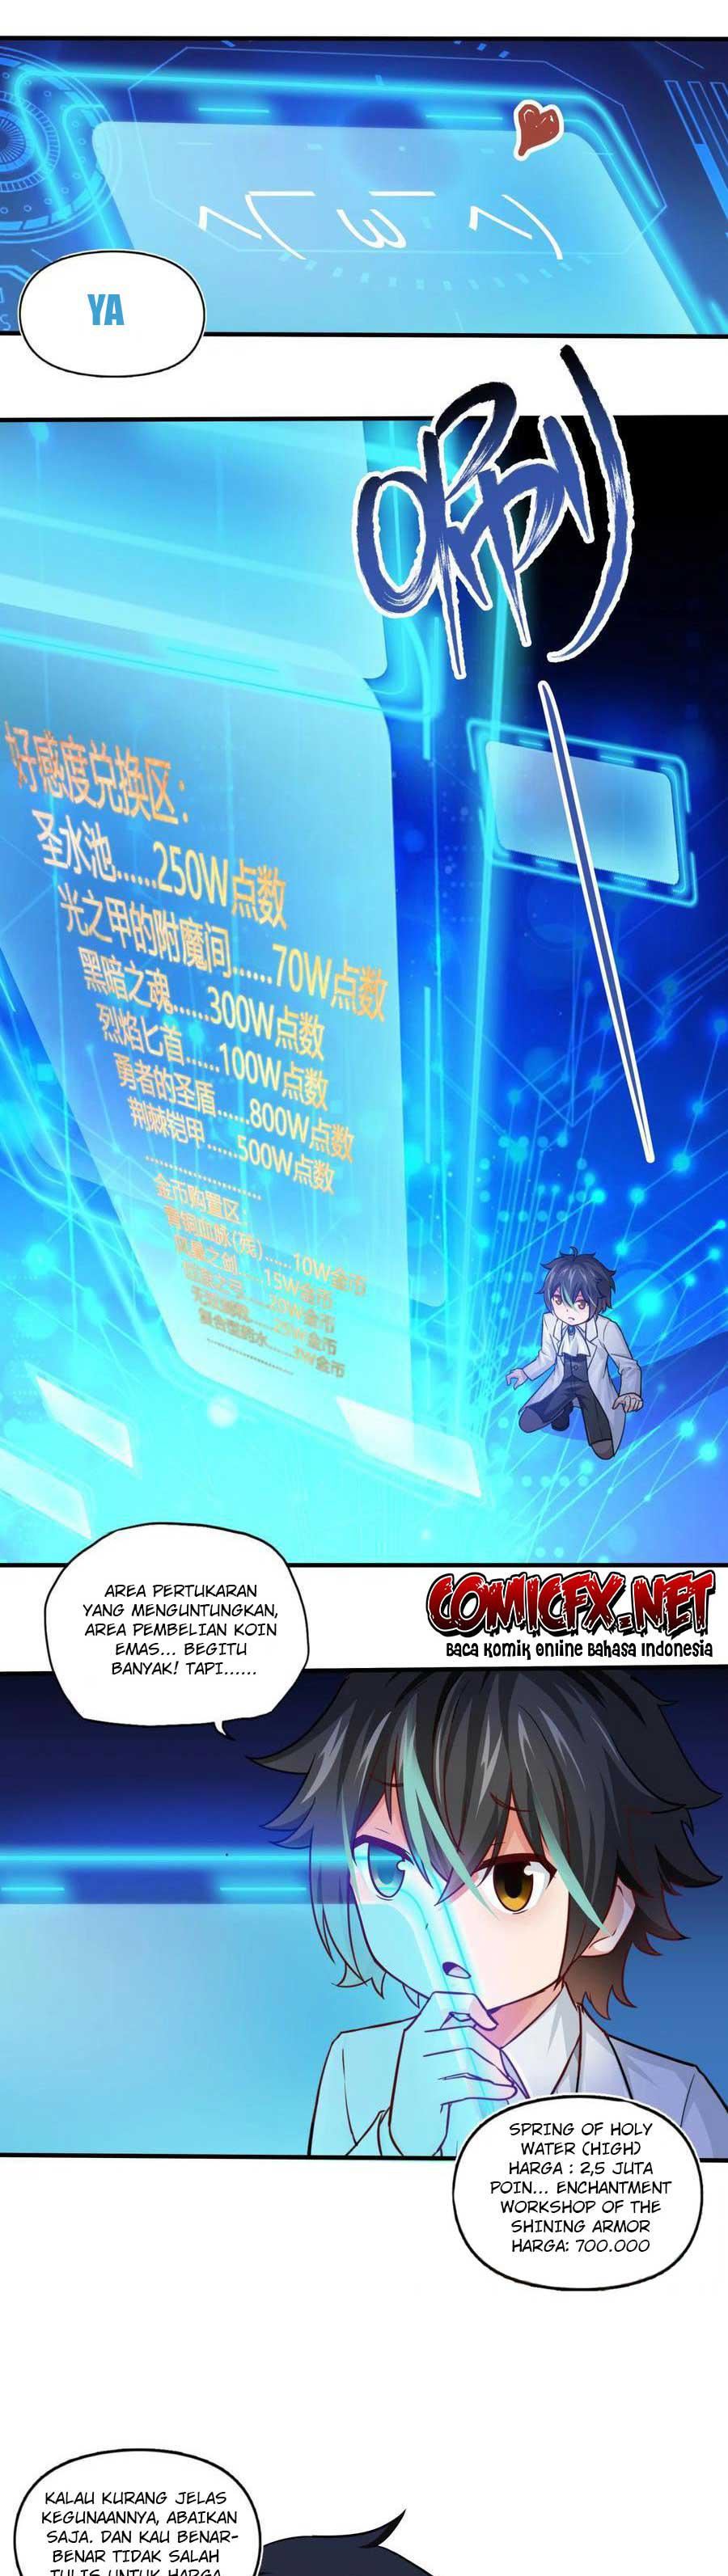 Dilarang COPAS - situs resmi www.mangacanblog.com - Komik little tyrant doesnt want to meet with a bad end 001 - chapter 1 2 Indonesia little tyrant doesnt want to meet with a bad end 001 - chapter 1 Terbaru 13|Baca Manga Komik Indonesia|Mangacan